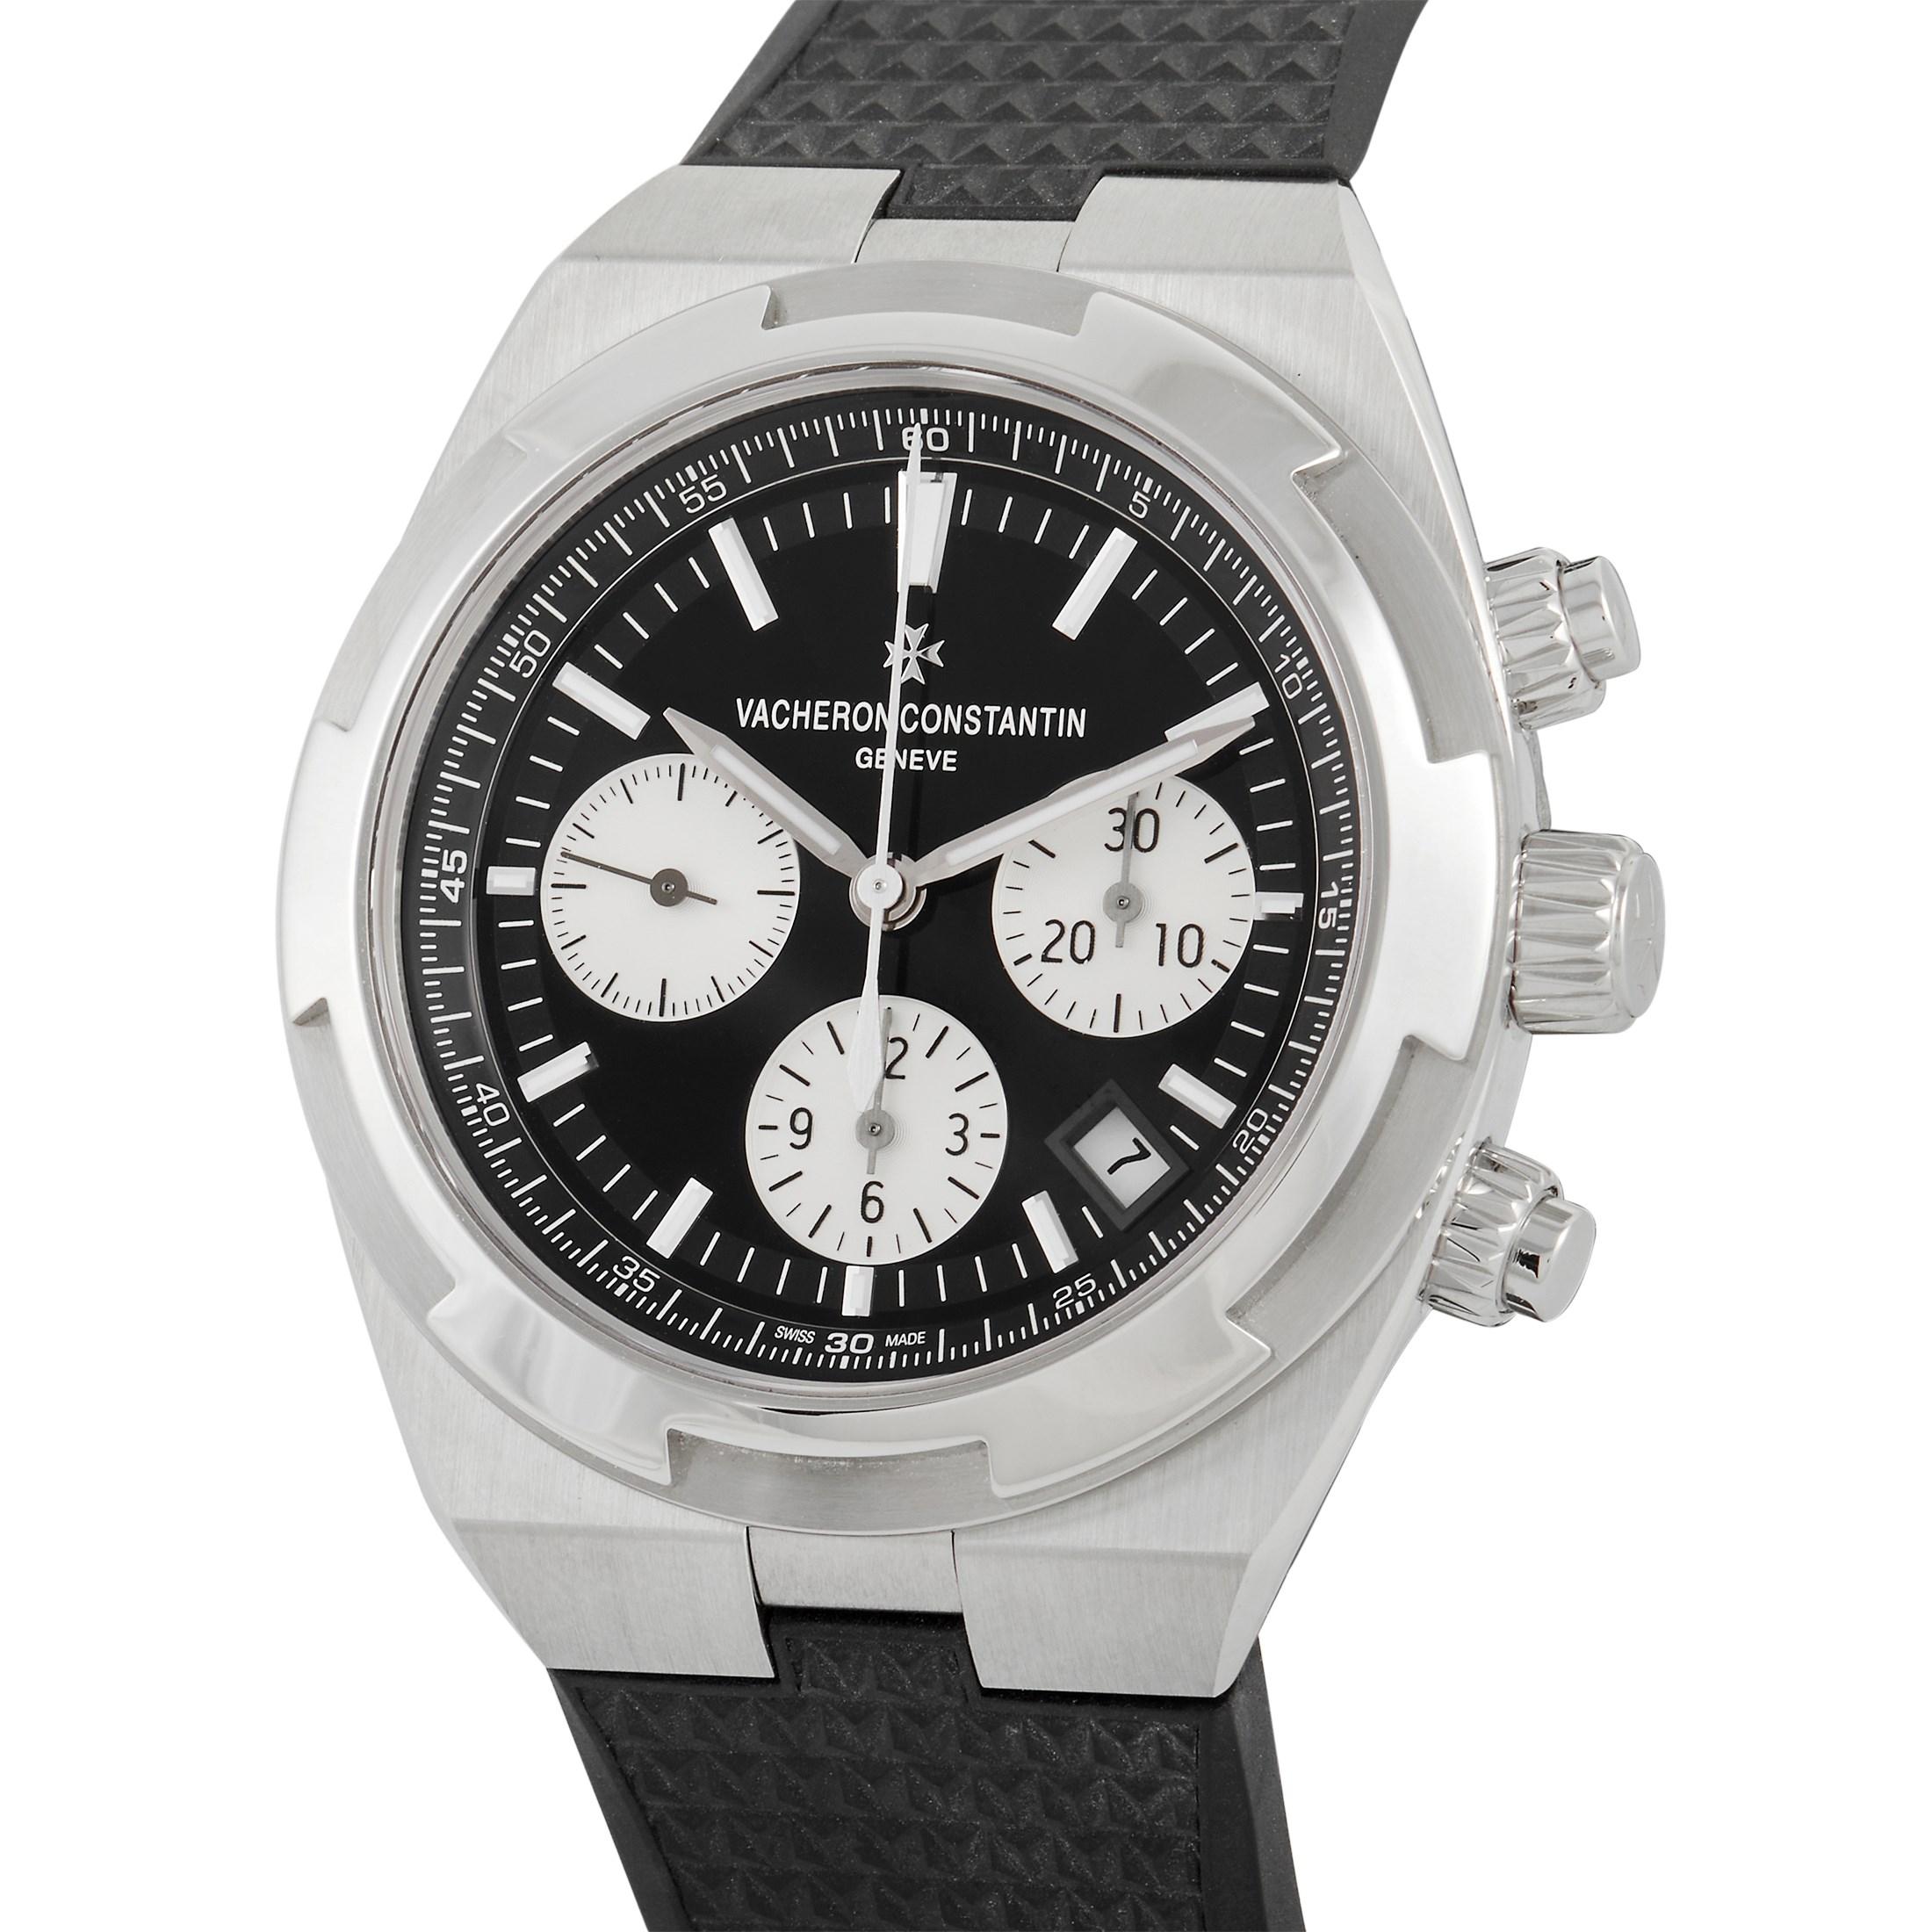 The Vacheron Constantin Overseas Chronograph Watch, reference number 5500V/110A-B481, is a sophisticated timepiece that will forever remain relevant.

This luxury piece begins with a 42mm case crafted from Stainless Steel, which contrasts